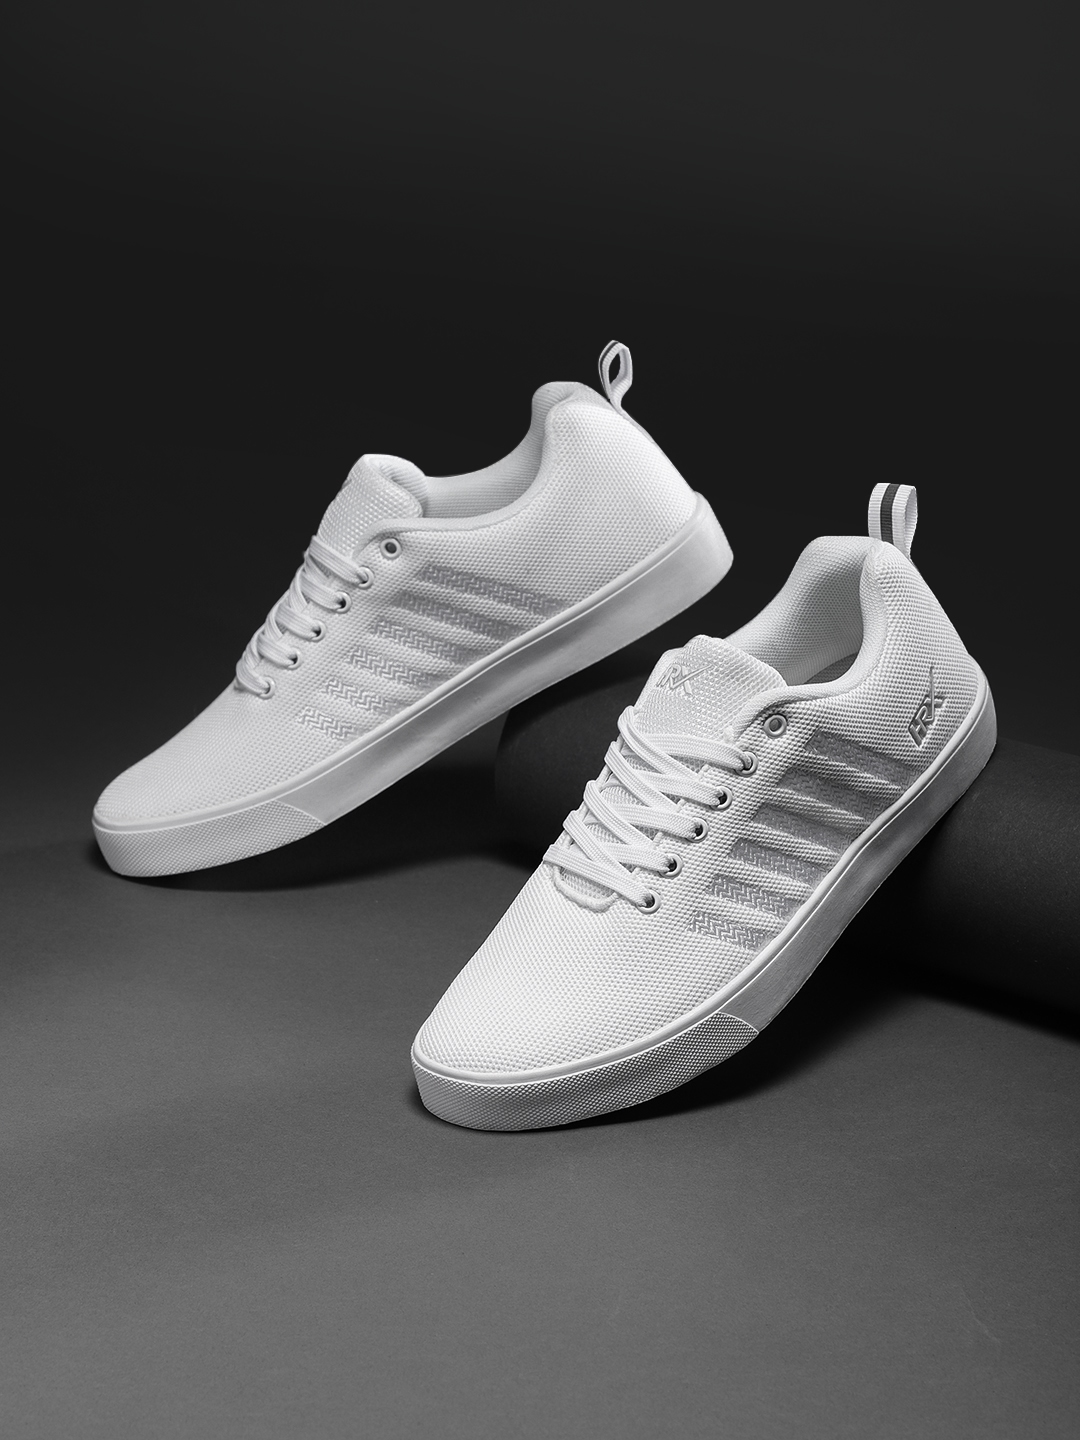 HRX by Hrithik Roshan Men White Solid Sneakers Sneakers For Men - Buy HRX  by Hrithik Roshan Men White Solid Sneakers Sneakers For Men Online at Best  Price - Shop Online for